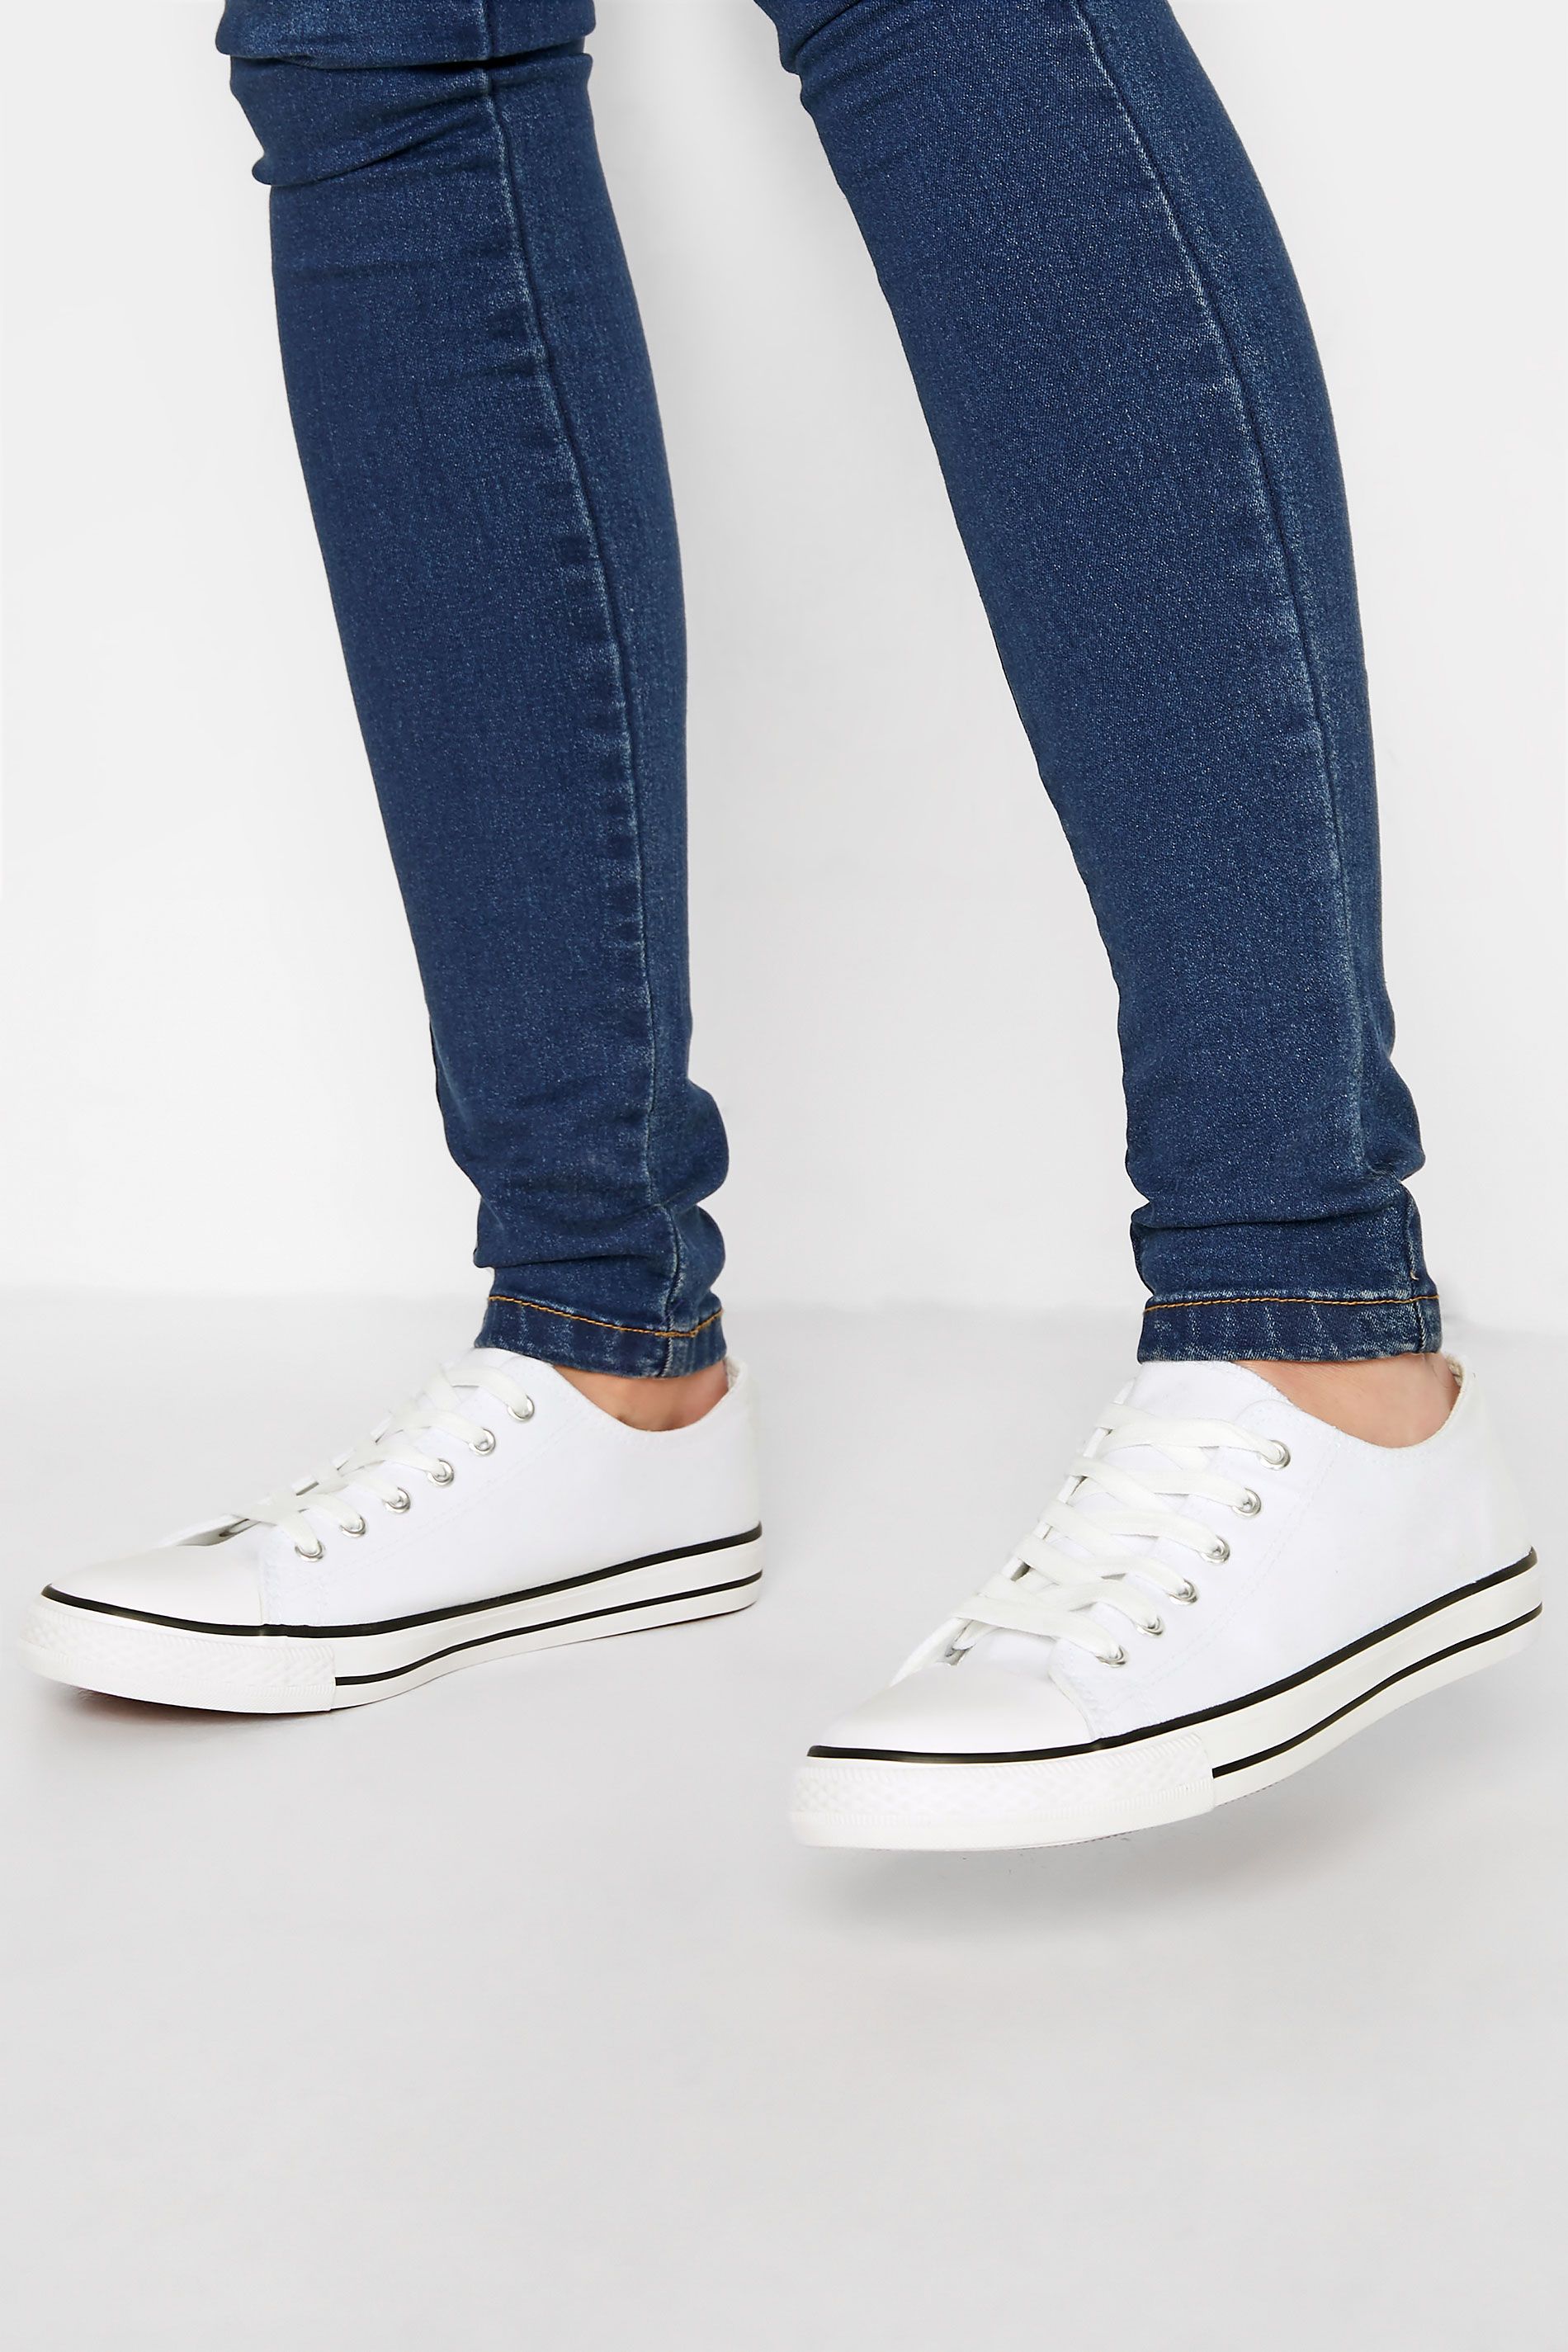 LTS Tall Women's White Canvas Low Trainers | Long Tall Sally | Yours Clothing UK